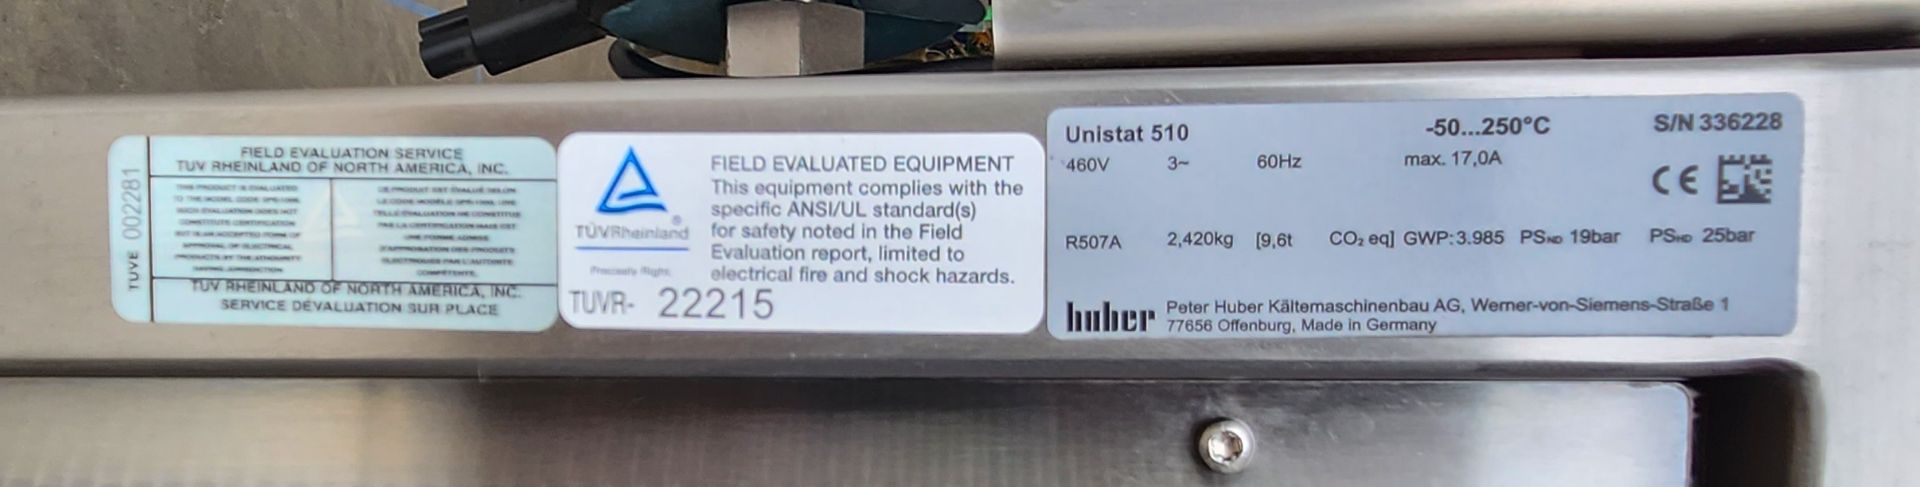 Used Huber Dynamic Temperature Control SYstem. Model Unistat 510 w/Pilot ONE Controls - Image 7 of 8